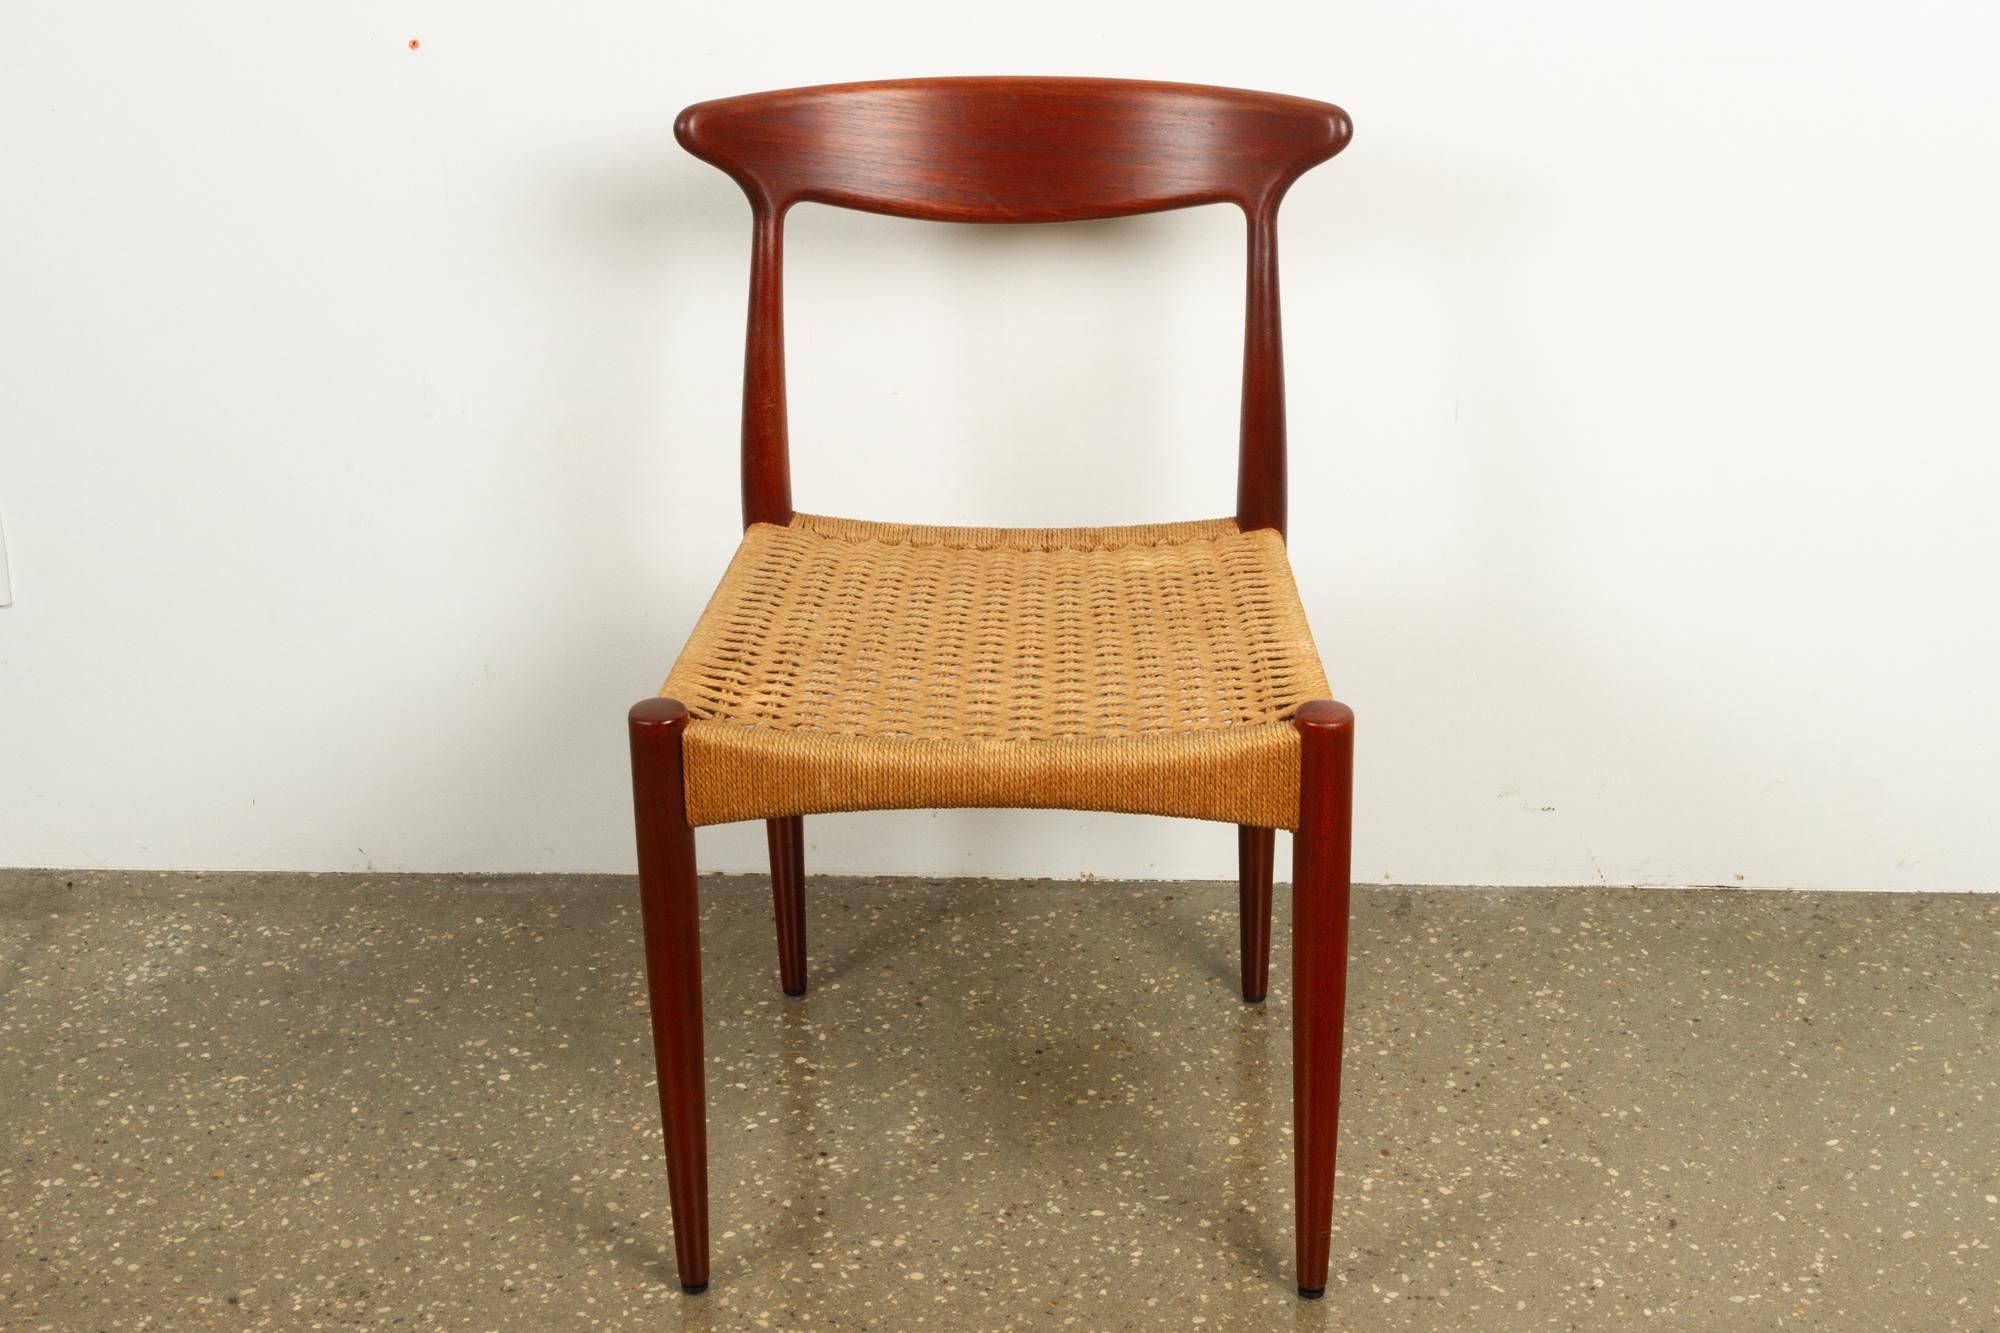 Vintage Danish teak chair by Arne Hovmand-Olsen for Mogens Kold, 1950s.
Elegant and sculptural chair in solid teak with original paper cord seat. Designed in 1951 as model MK310 by renowned Danish architect A. Hovmand Olsen. A very beautiful